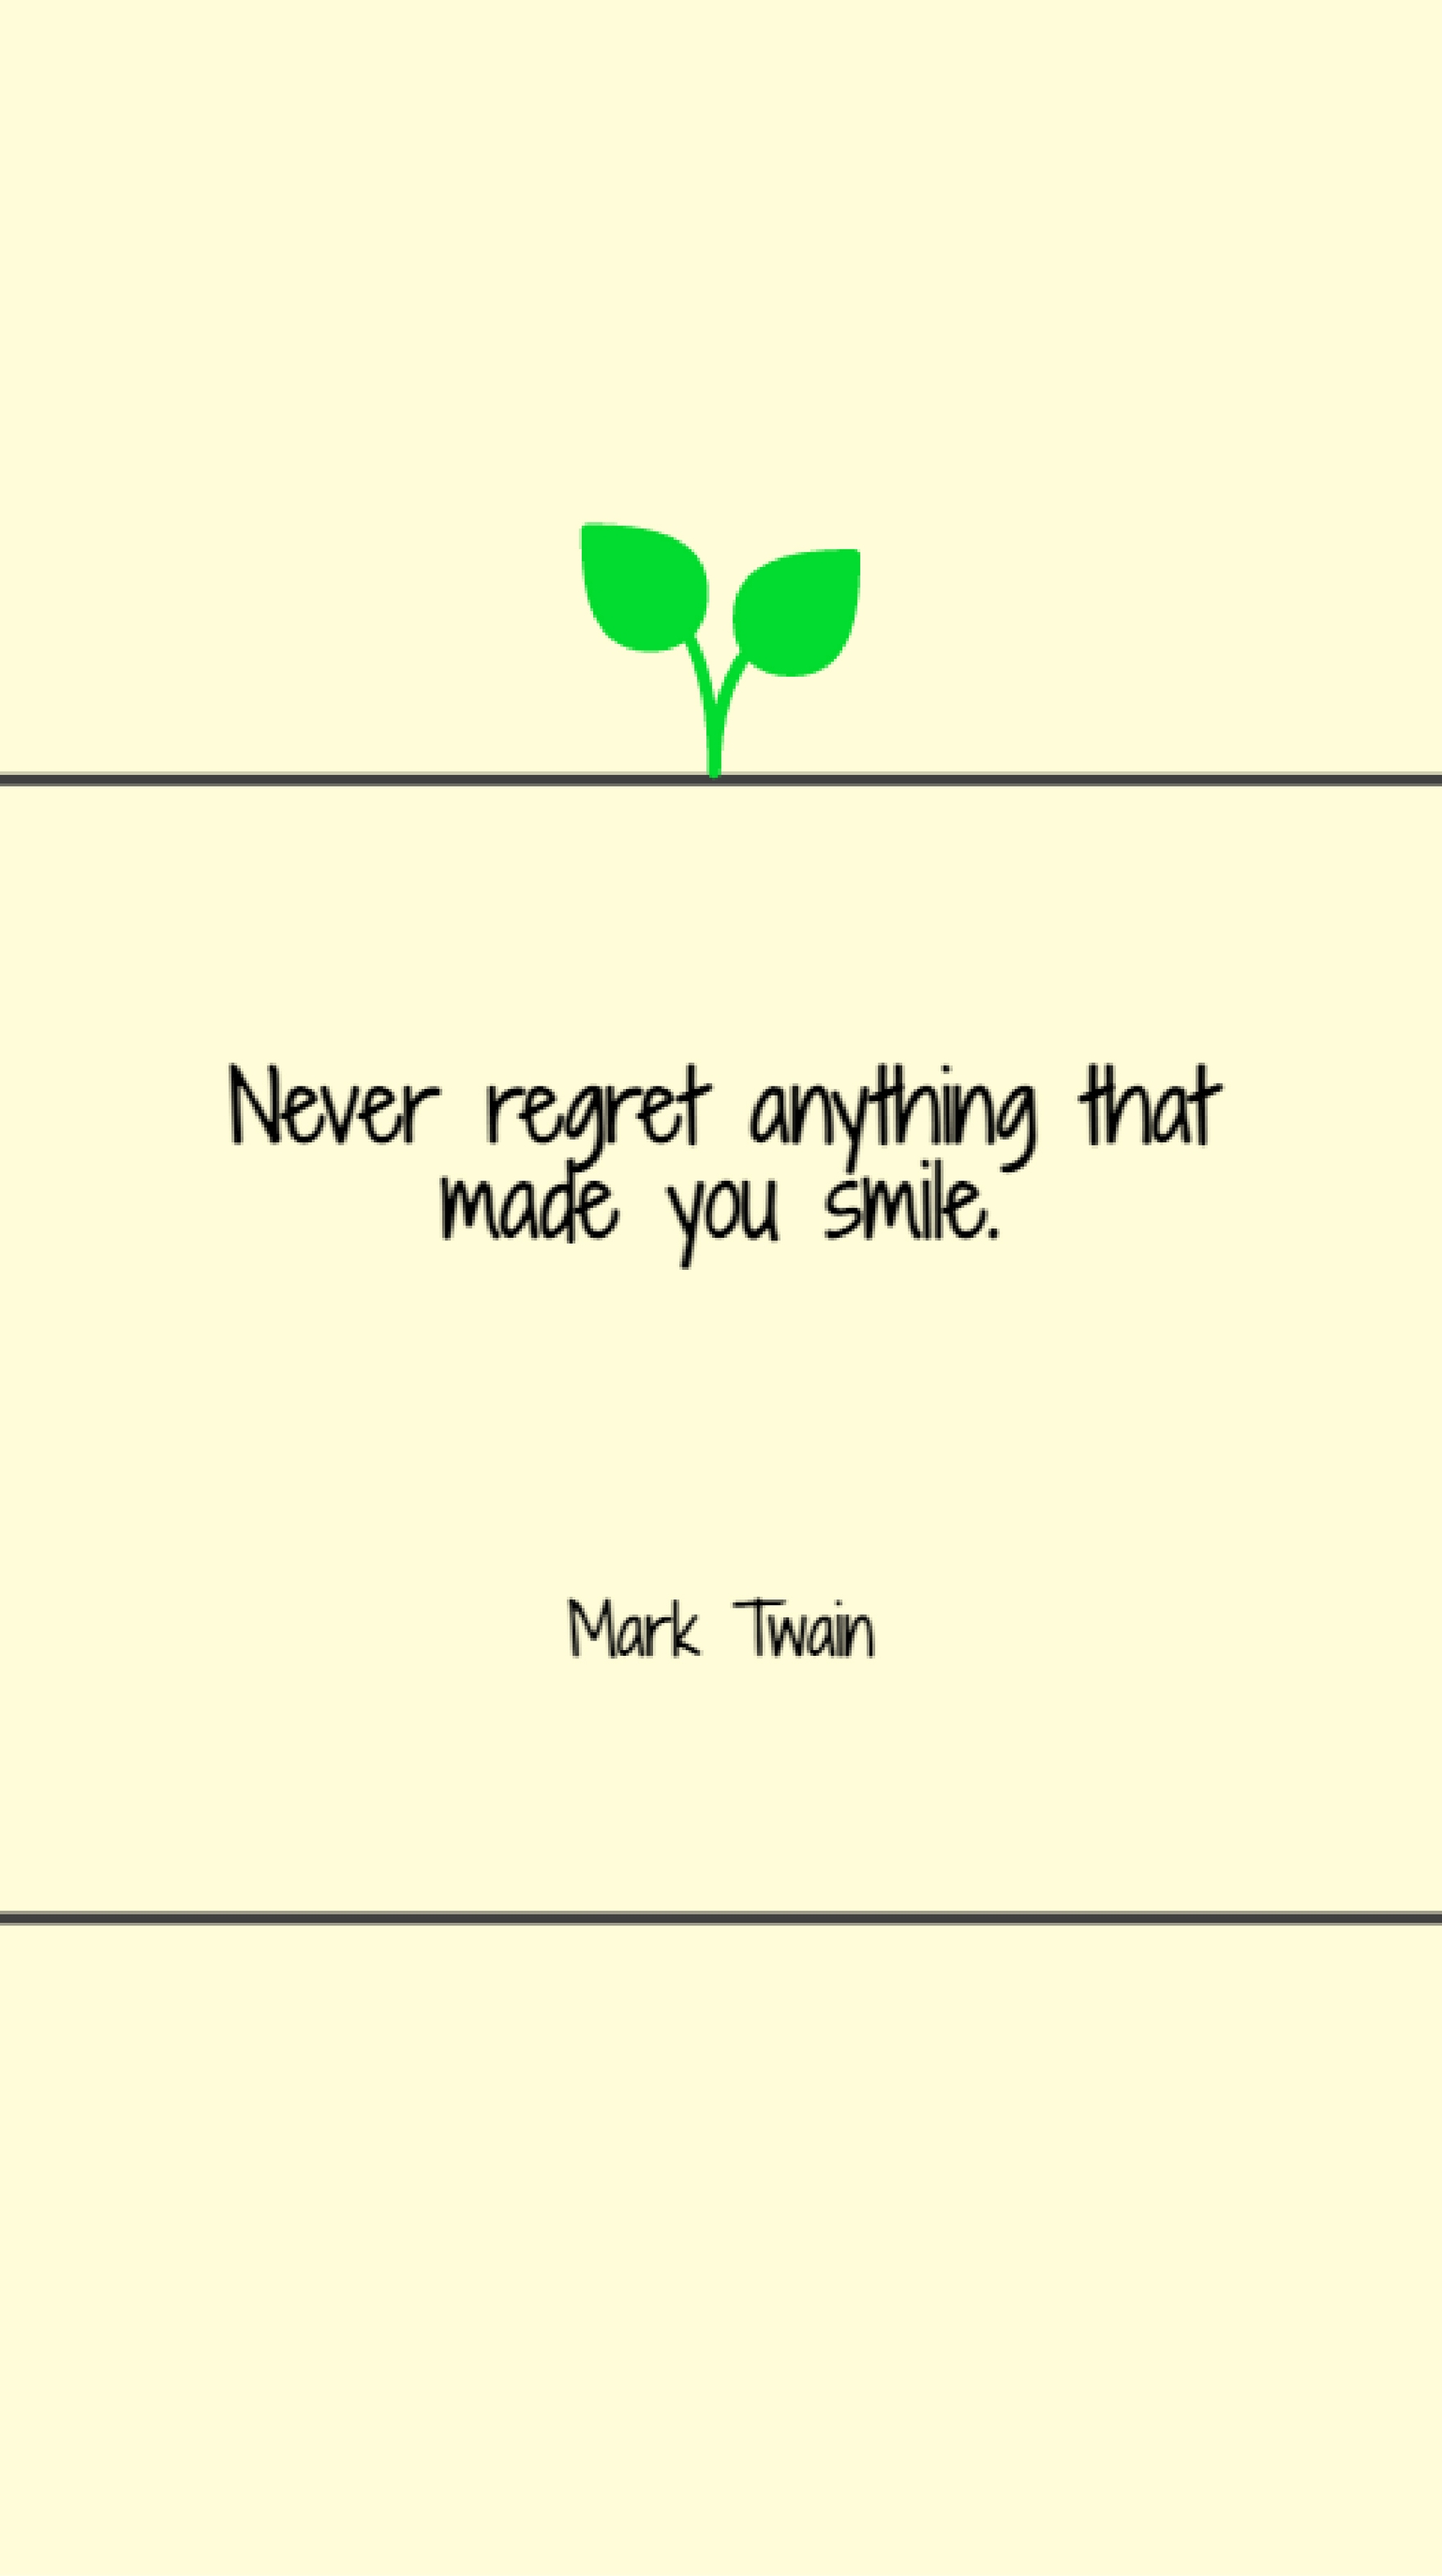 Mark Twain - Never regret anything that made you smile